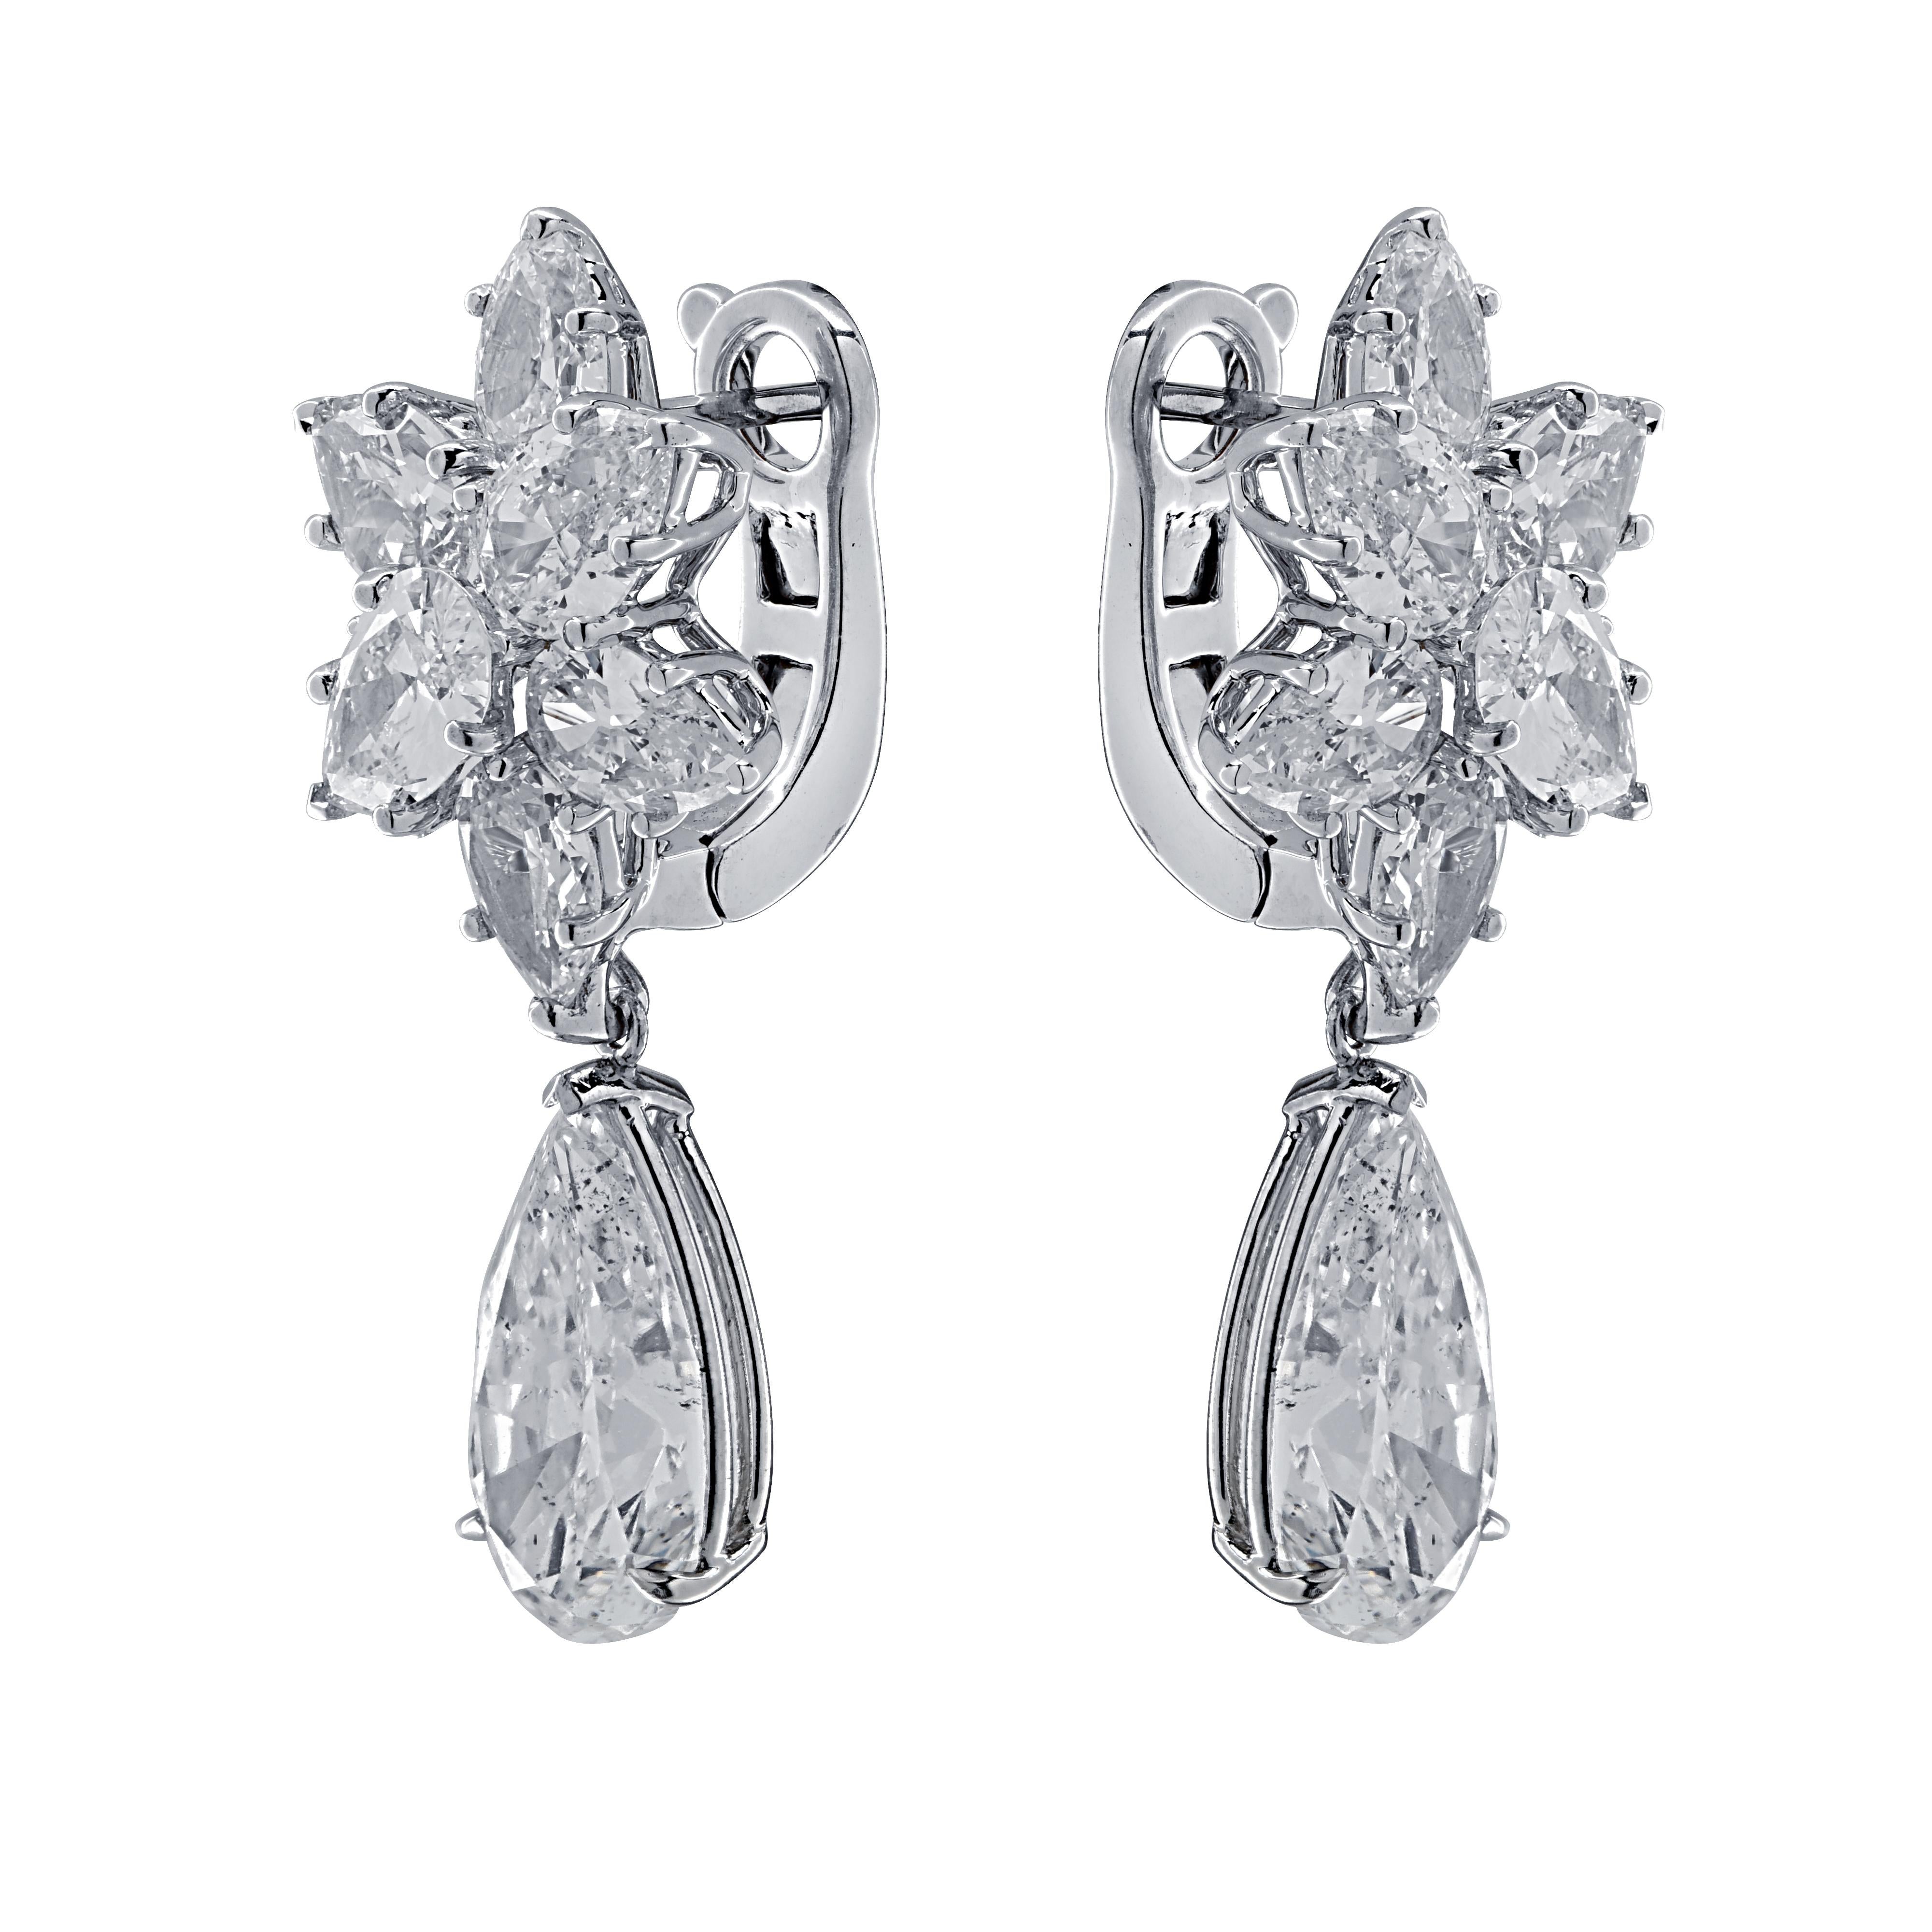 Sensational Vivid Diamonds day and night diamond earrings, finely crafted by hand in 18 karat white gold, showcasing a spectacular GIA certified pear shape diamond weighing 3.04 carats, G color, SI2 clarity, and a spectacular EGLNY Certified pear